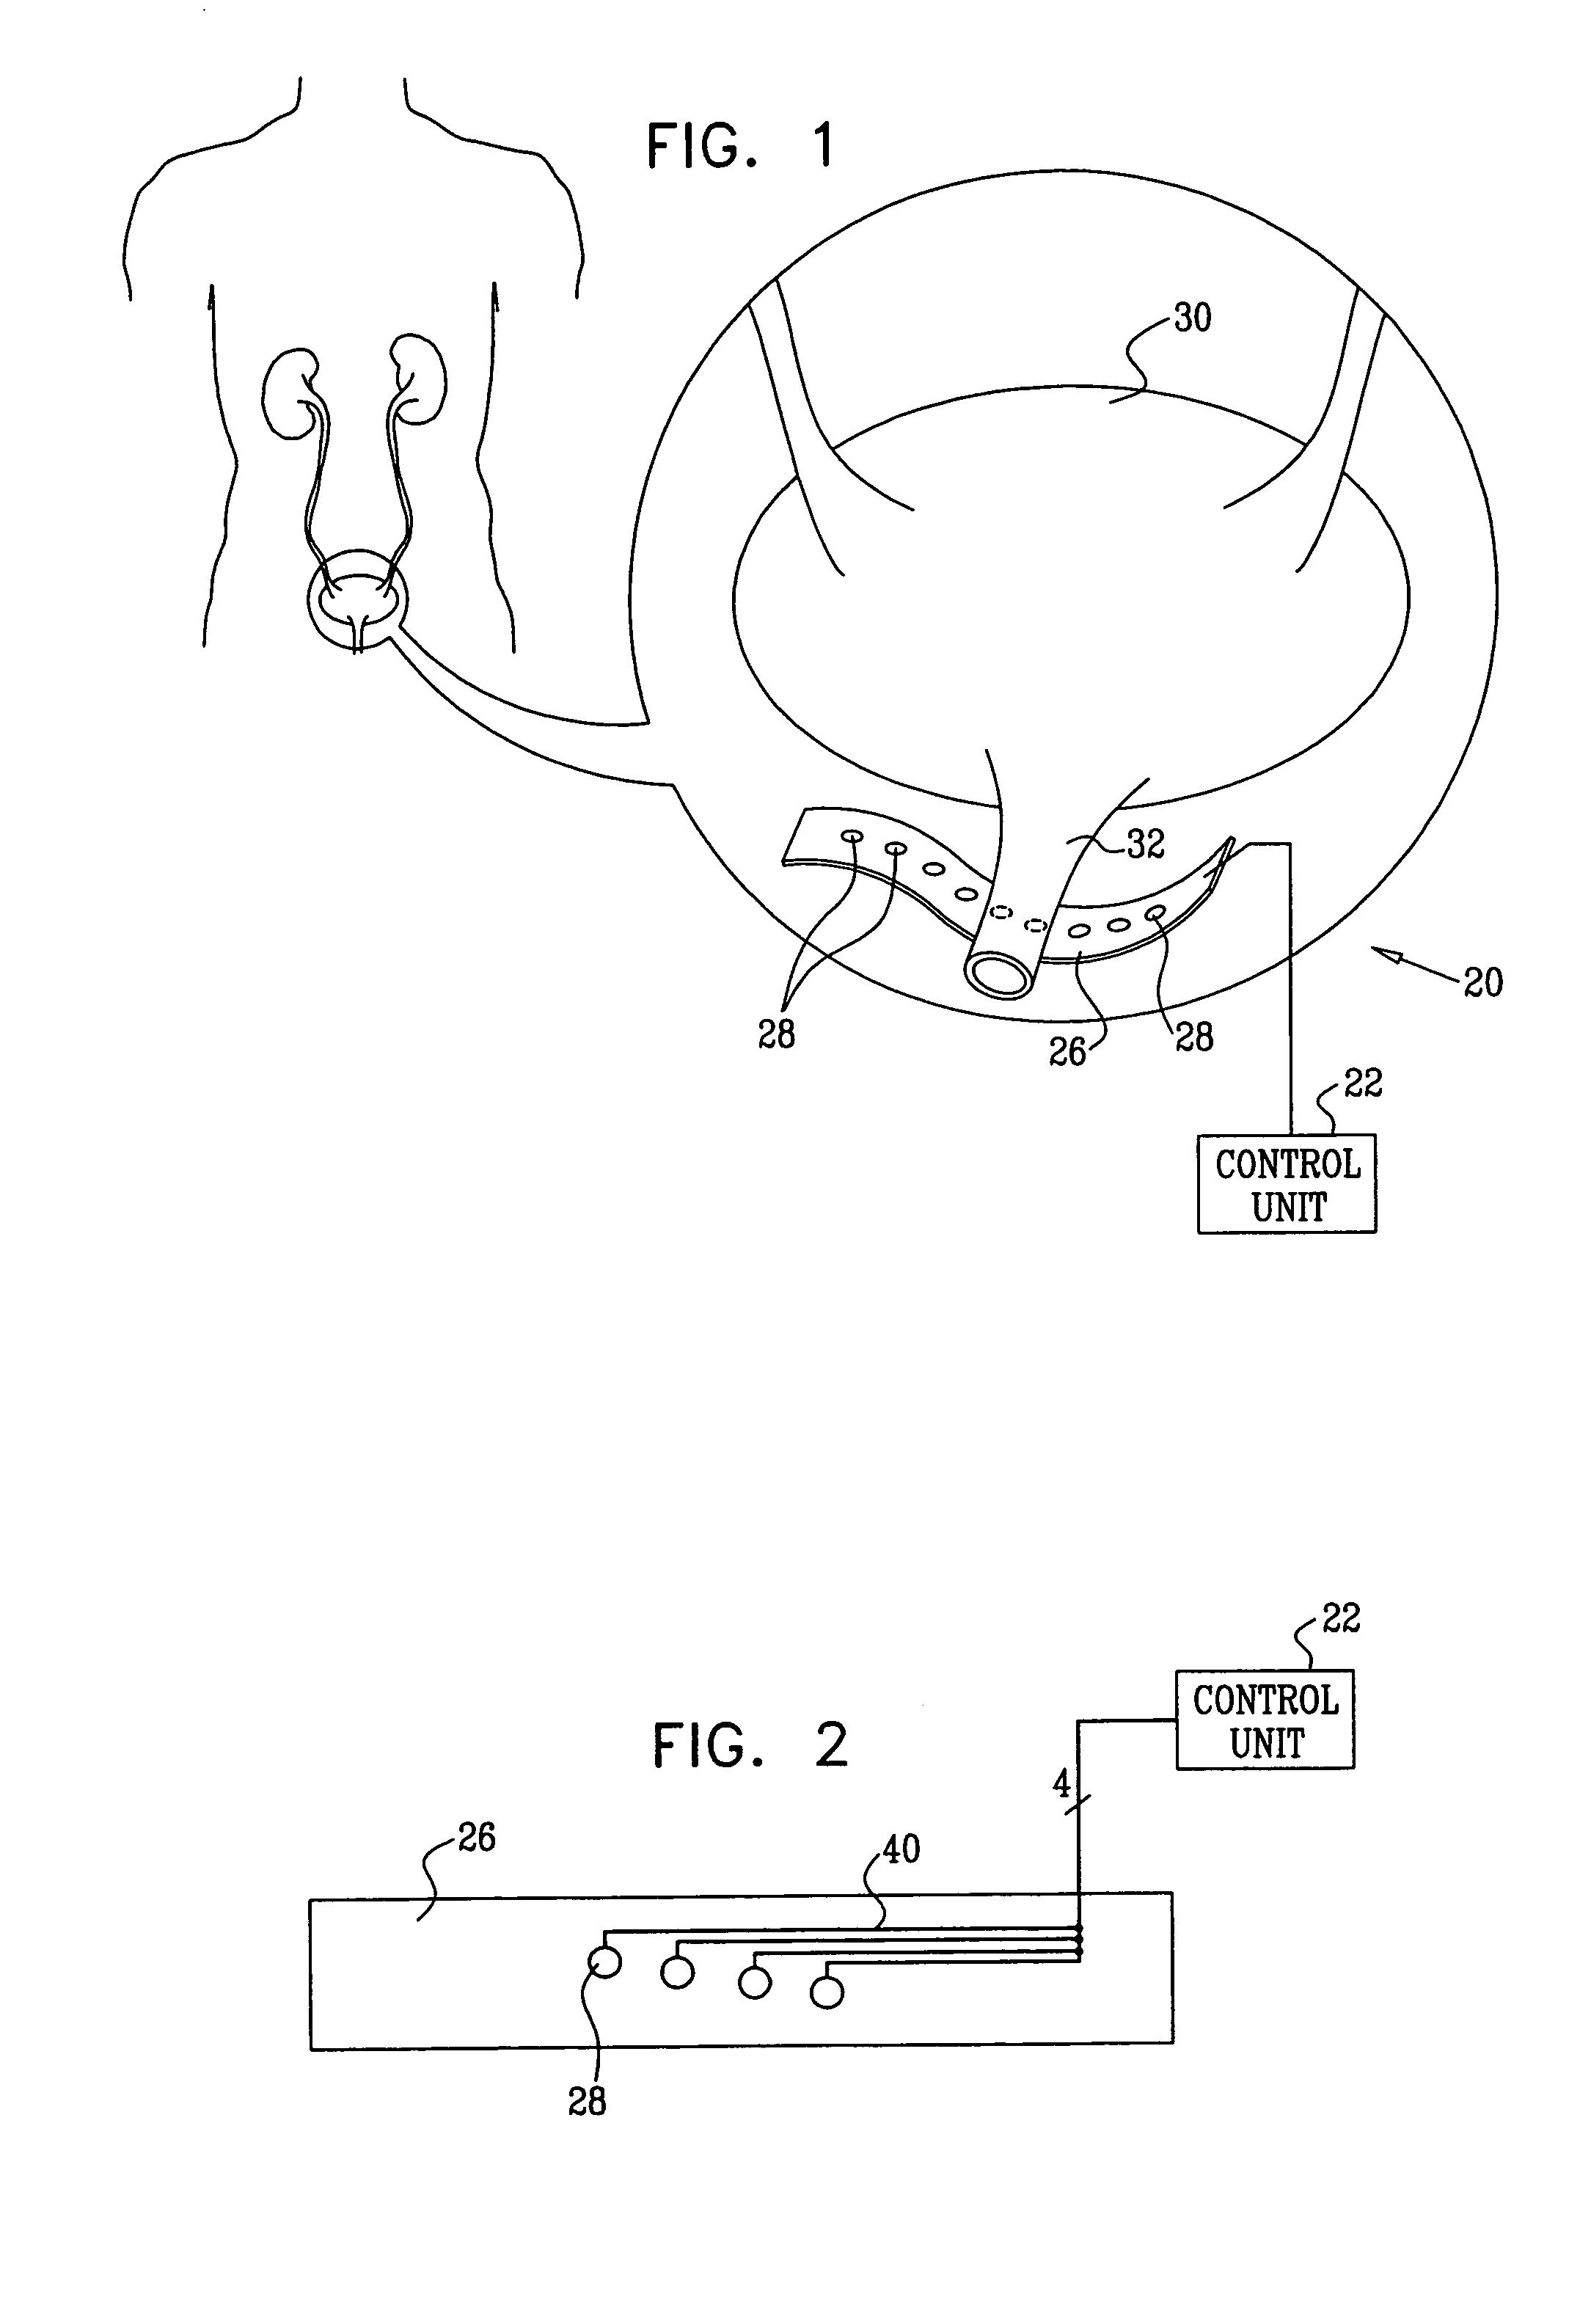 Apparatus for treating stress and urge incontinence